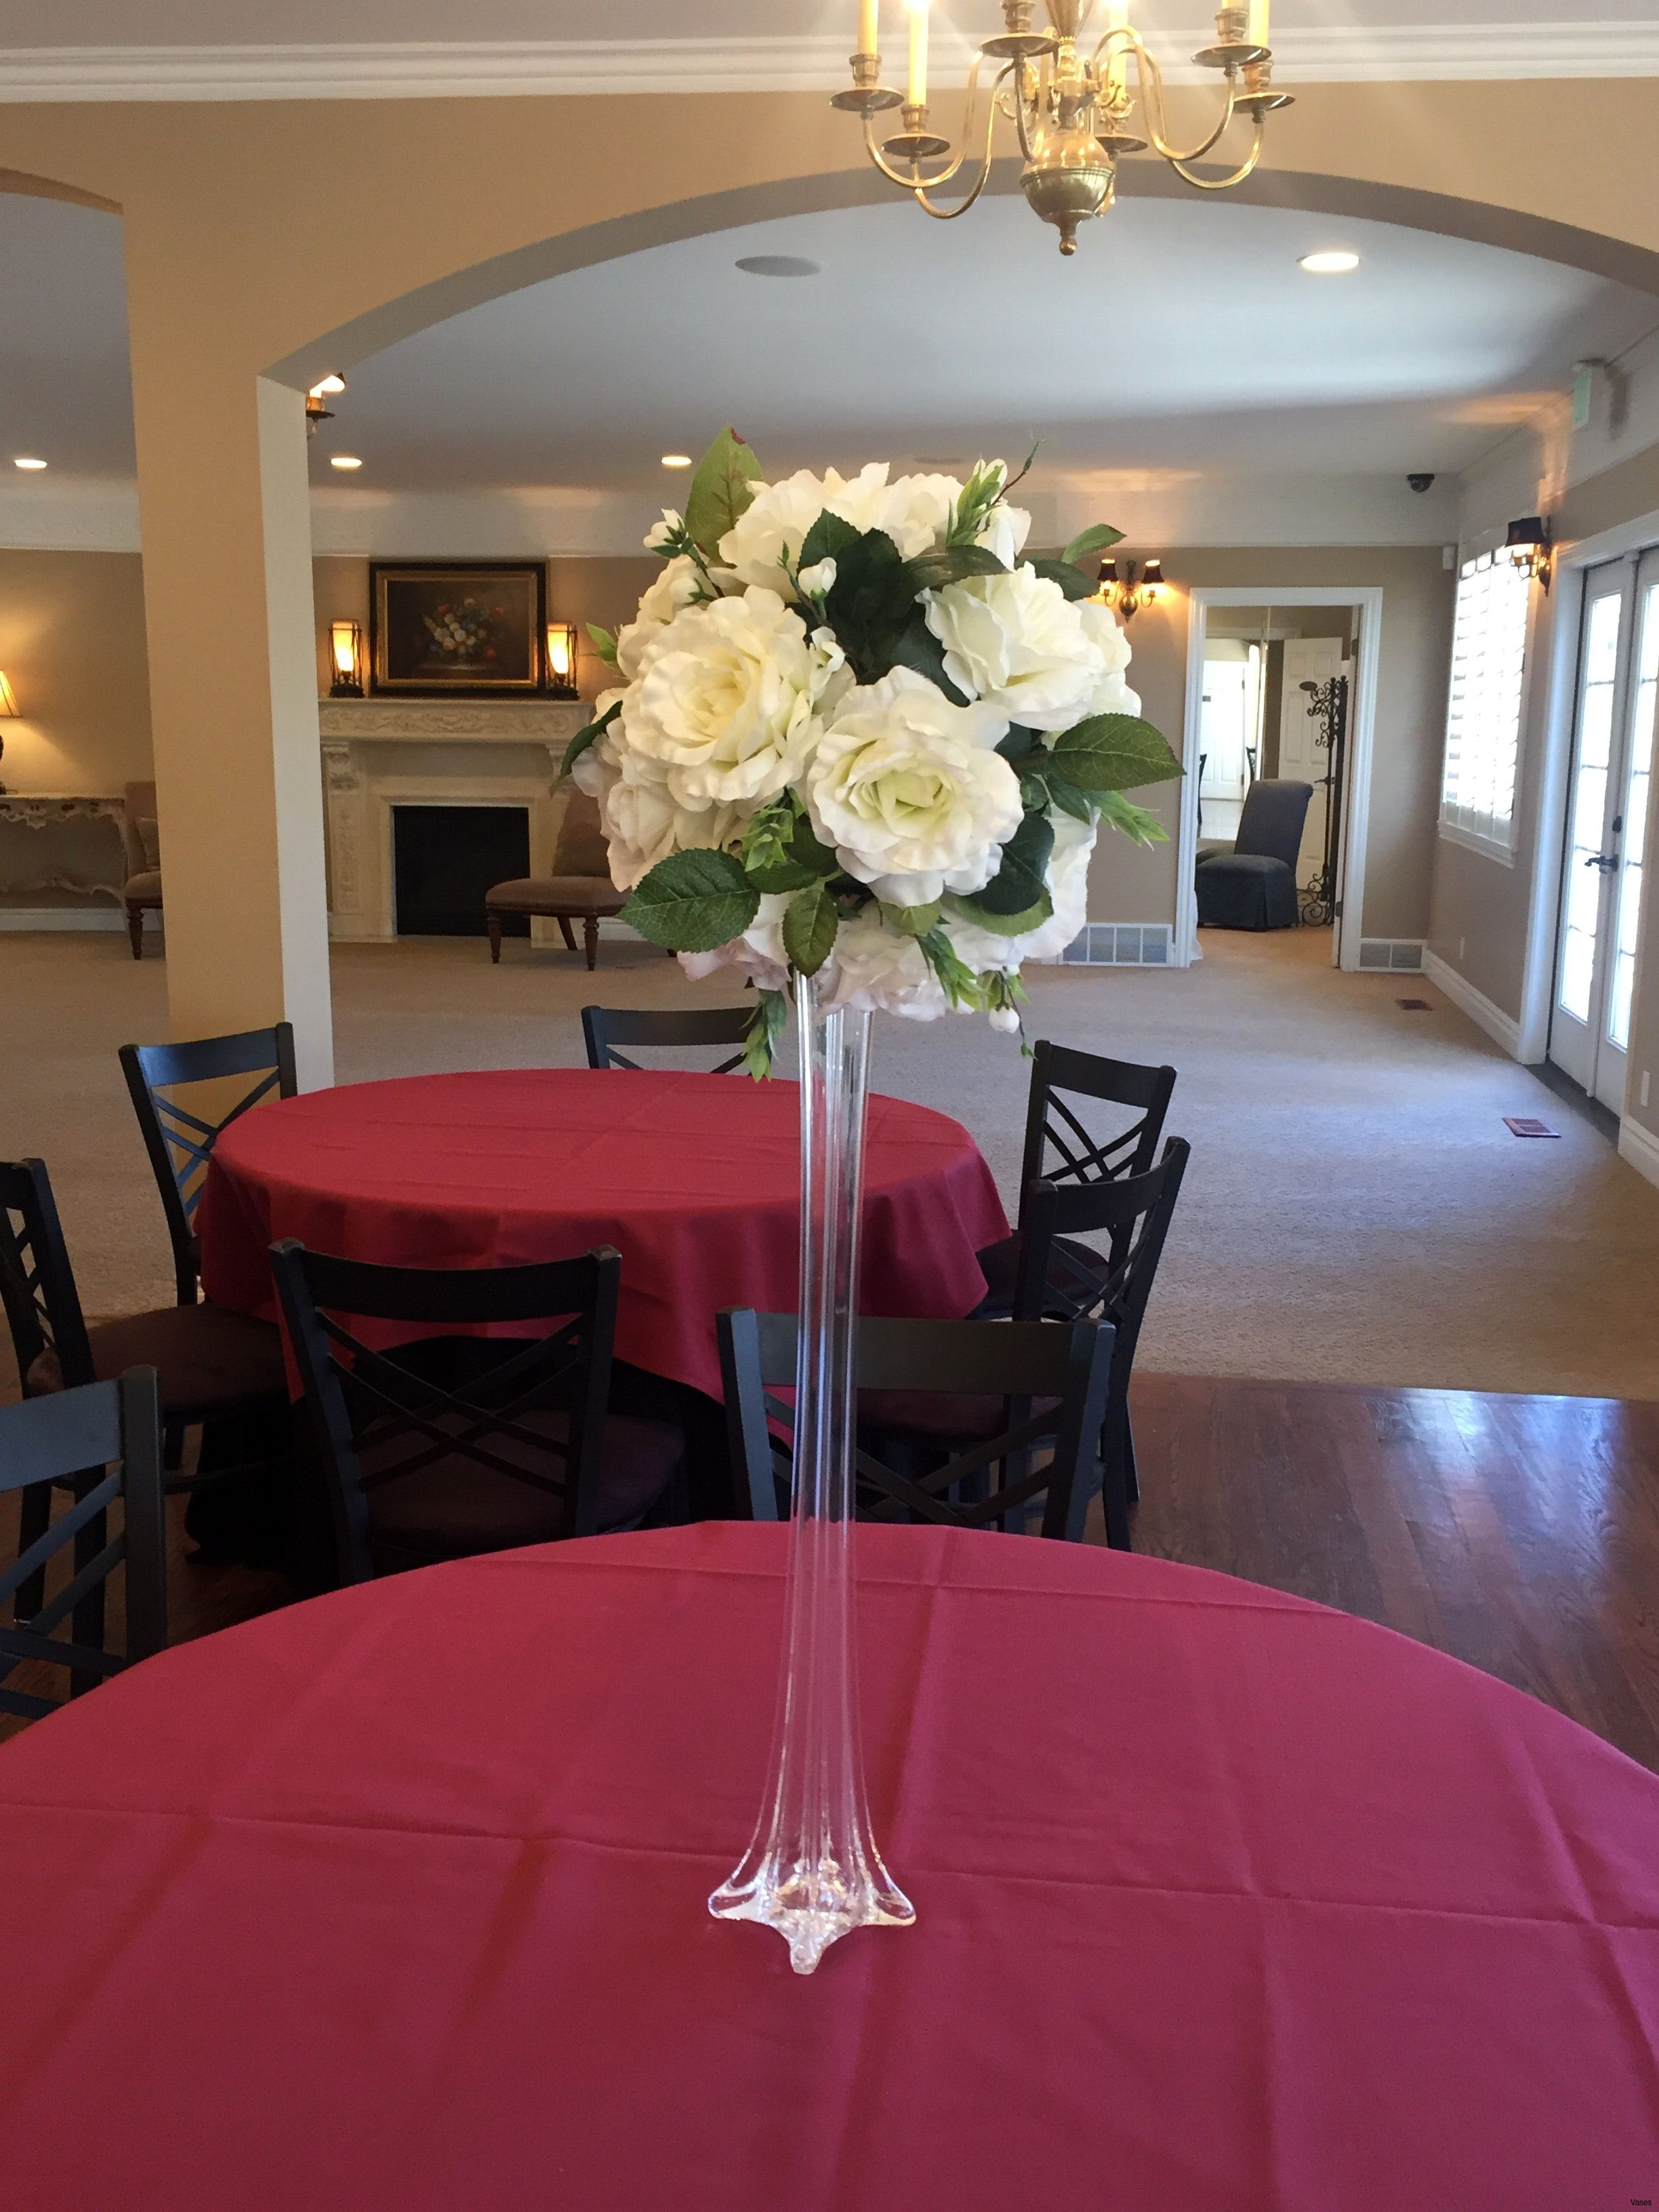 26 Famous Large White Vases for Sale 2024 free download large white vases for sale of 24 tall vases for sale the weekly world with regard to lovely wedding decoration rental